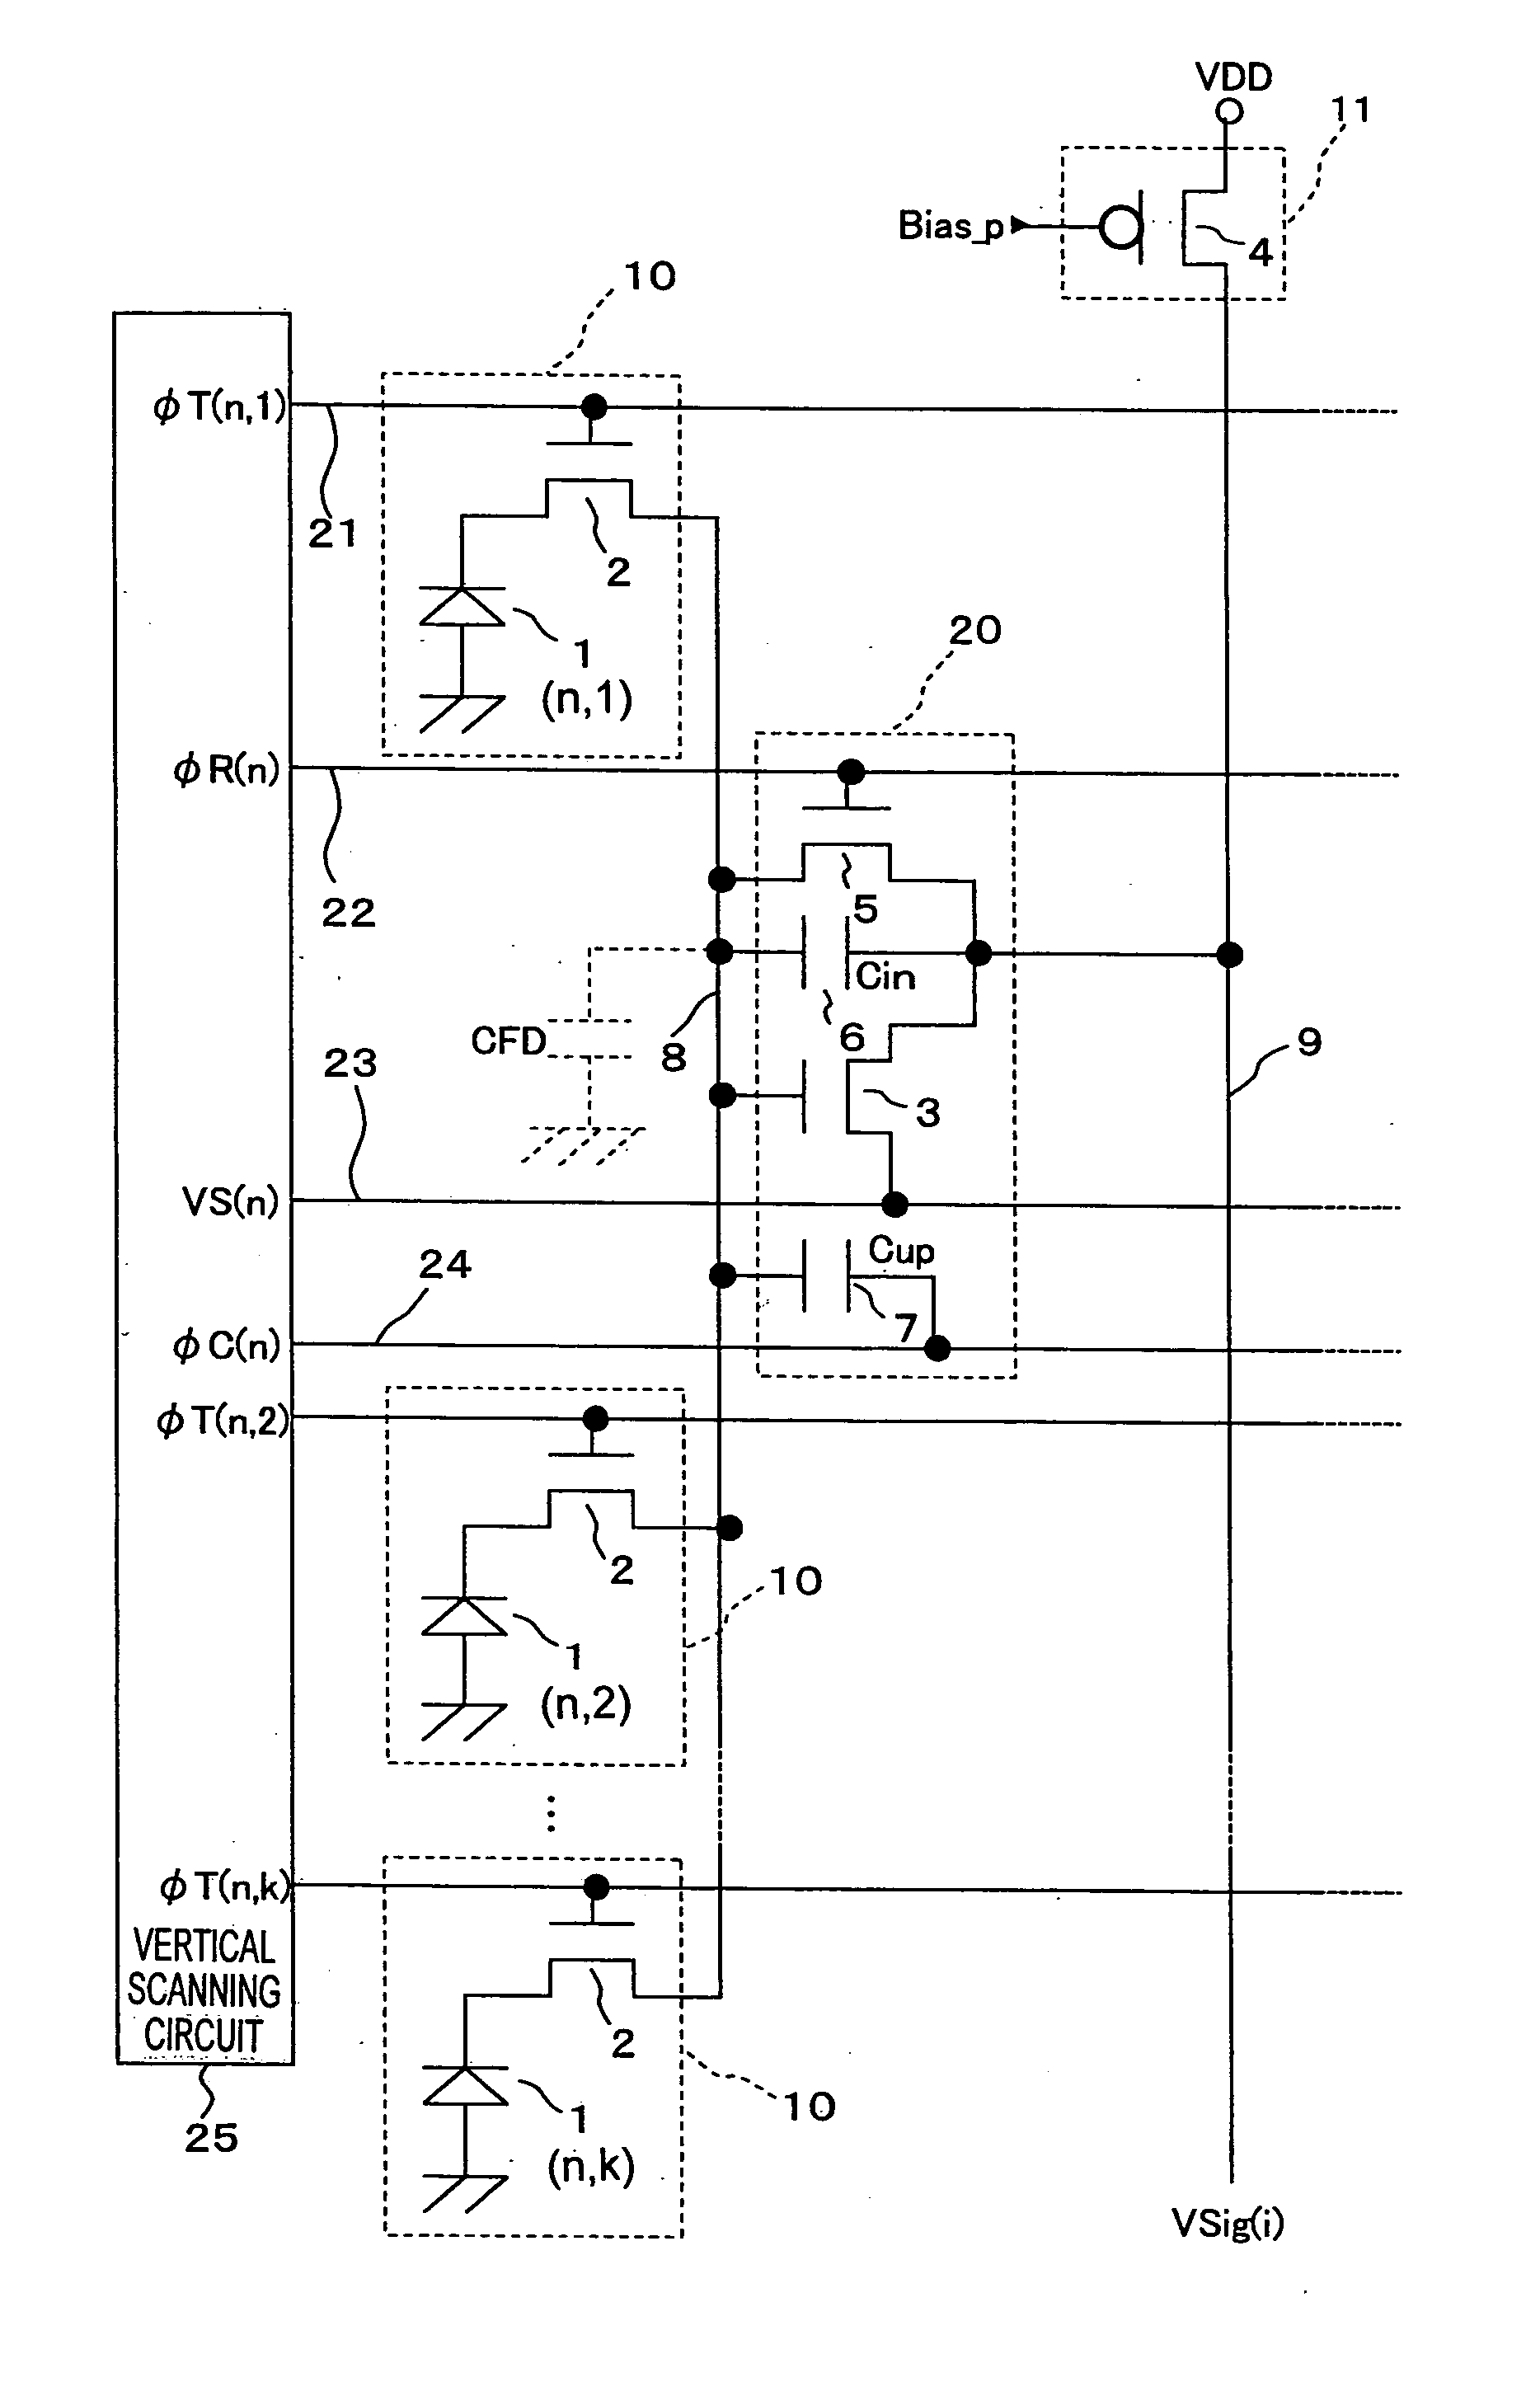 Amplifying solid-state imaging device